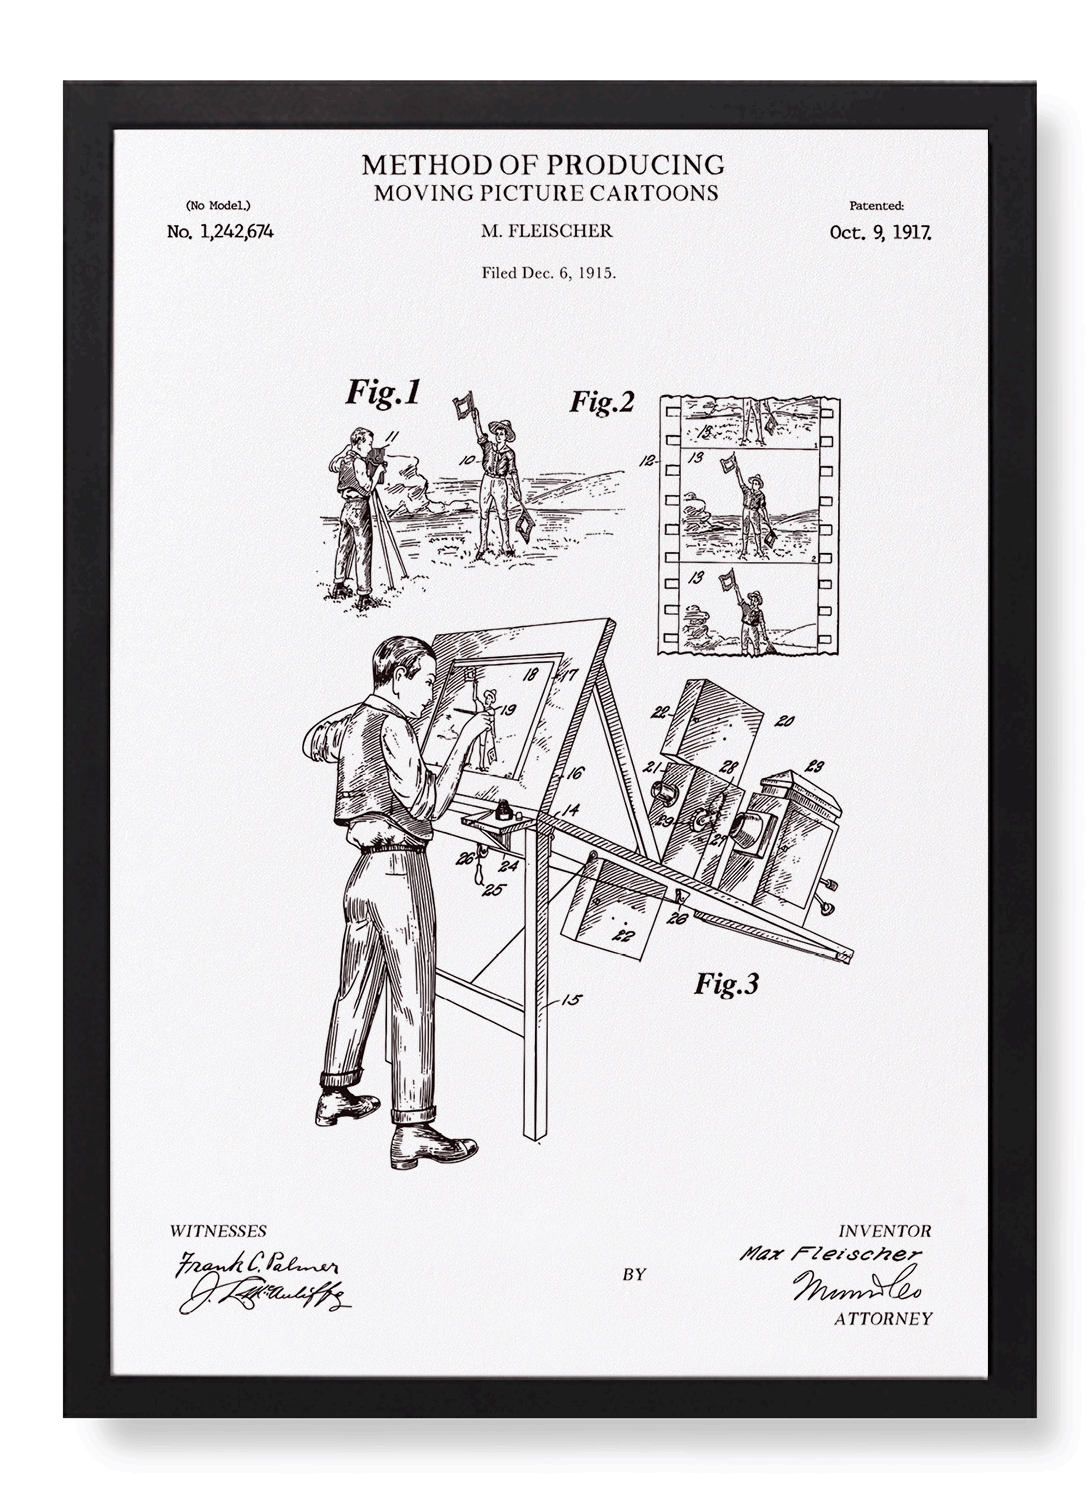 PATENT OF MOVING PICTURE CARTOONS (1917)